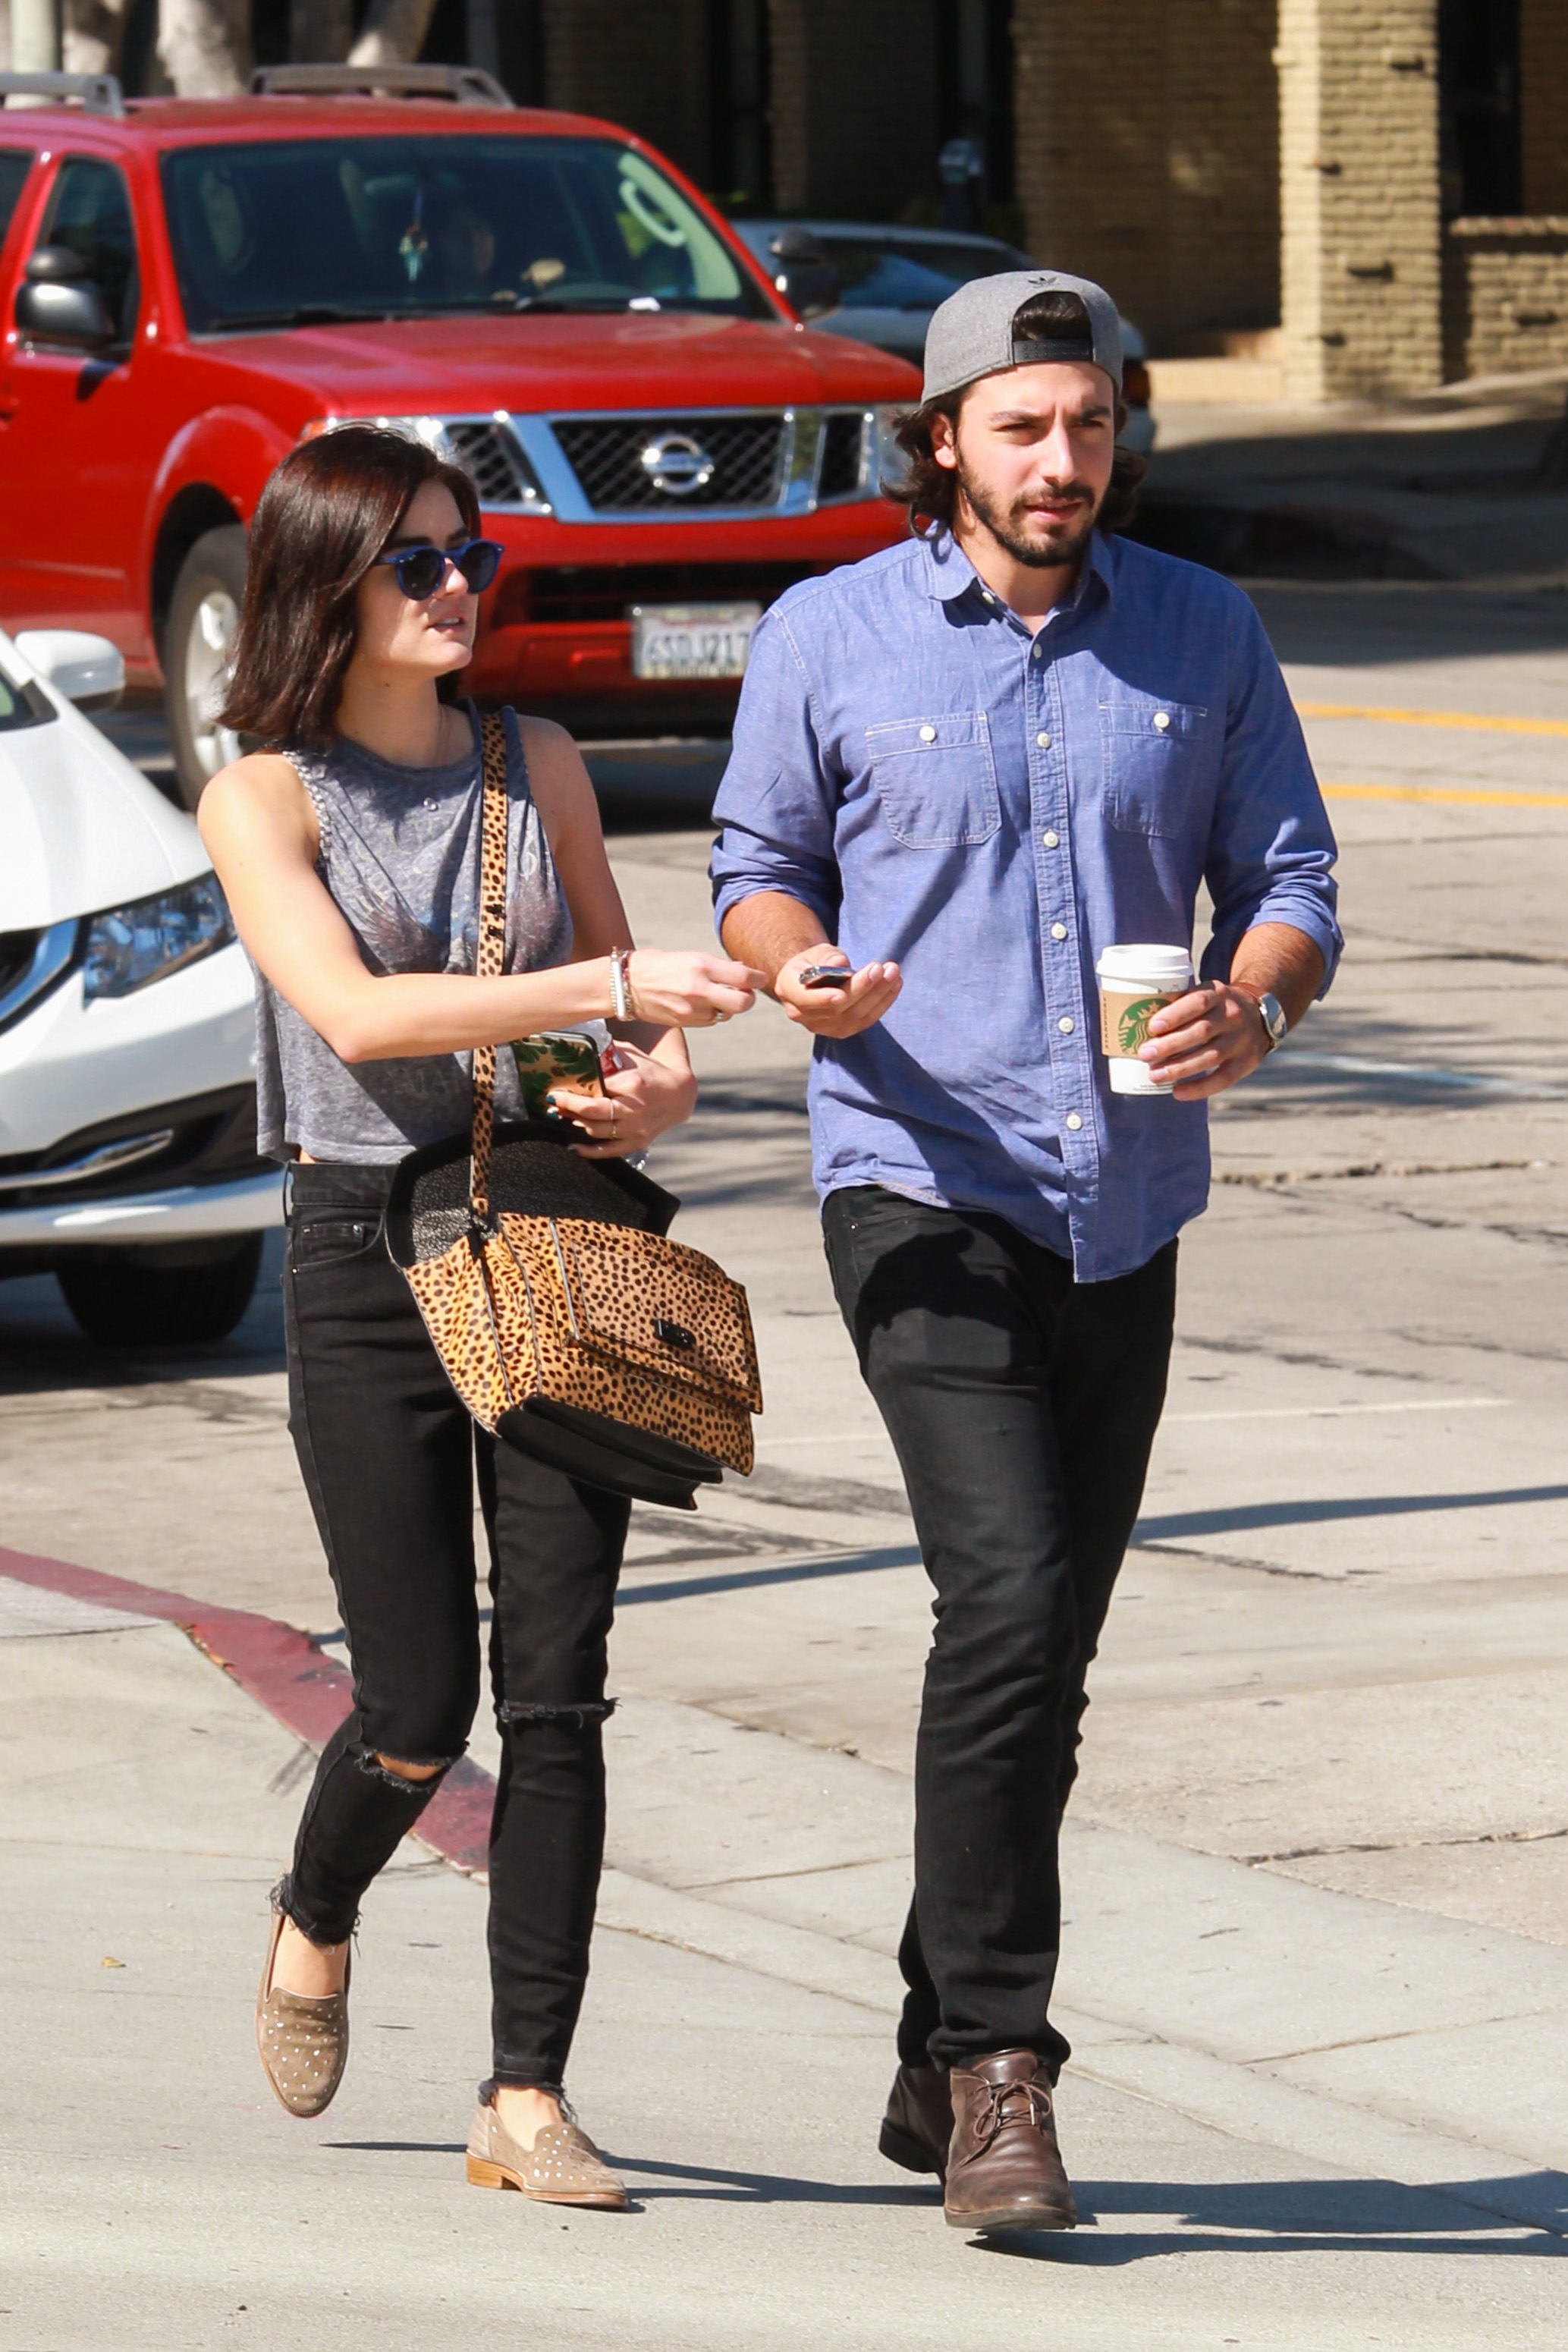 Lucy Hale and Anthony Kalabretta were seen walking together on October 20, 2015, in Los Angeles, California